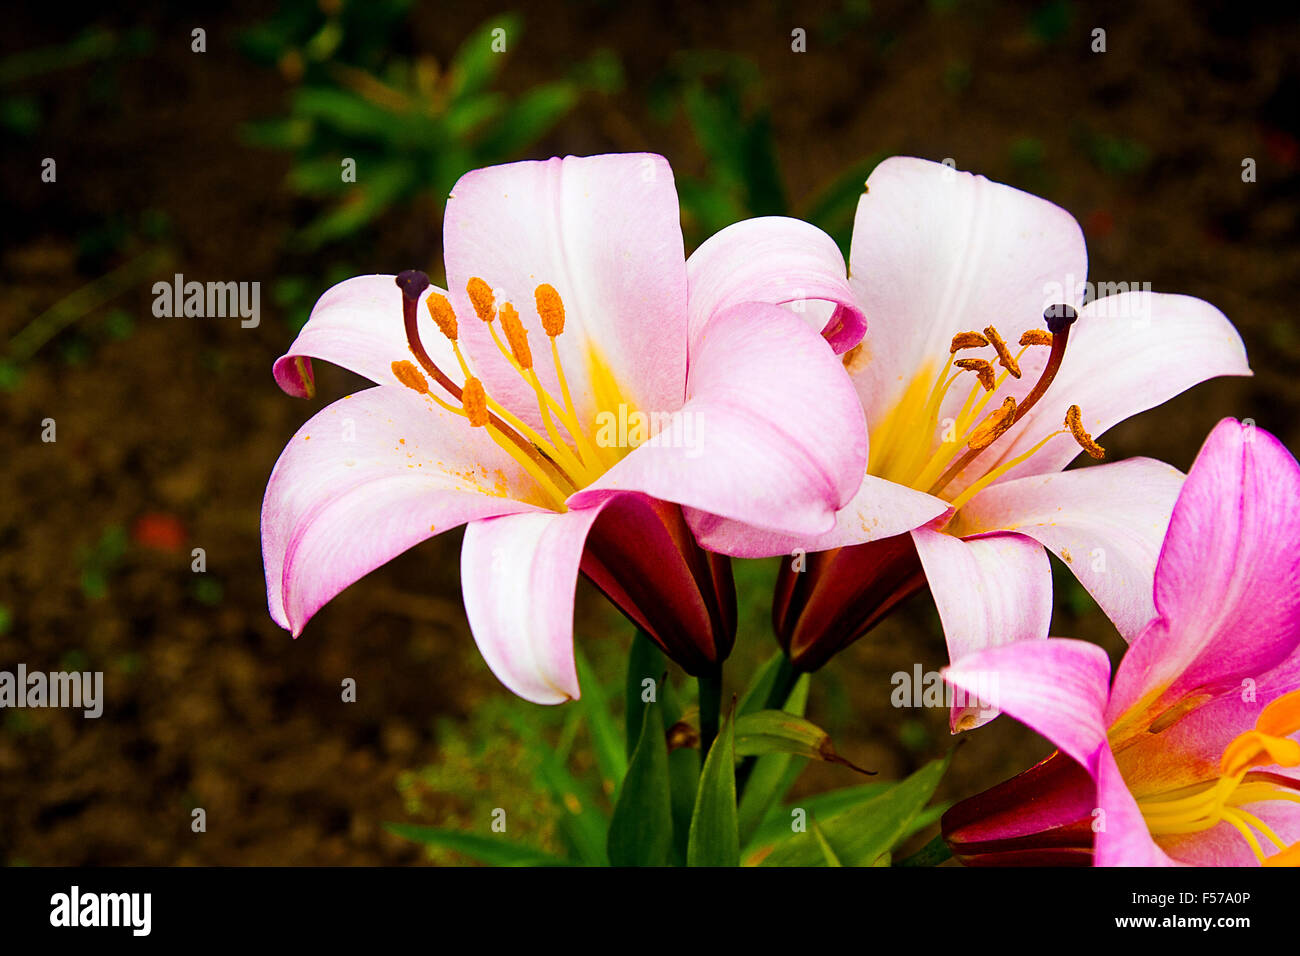 Pink and yellow lily blossoms on a black background. Close up view of lily flowers in the autumn garden. Stock Photo